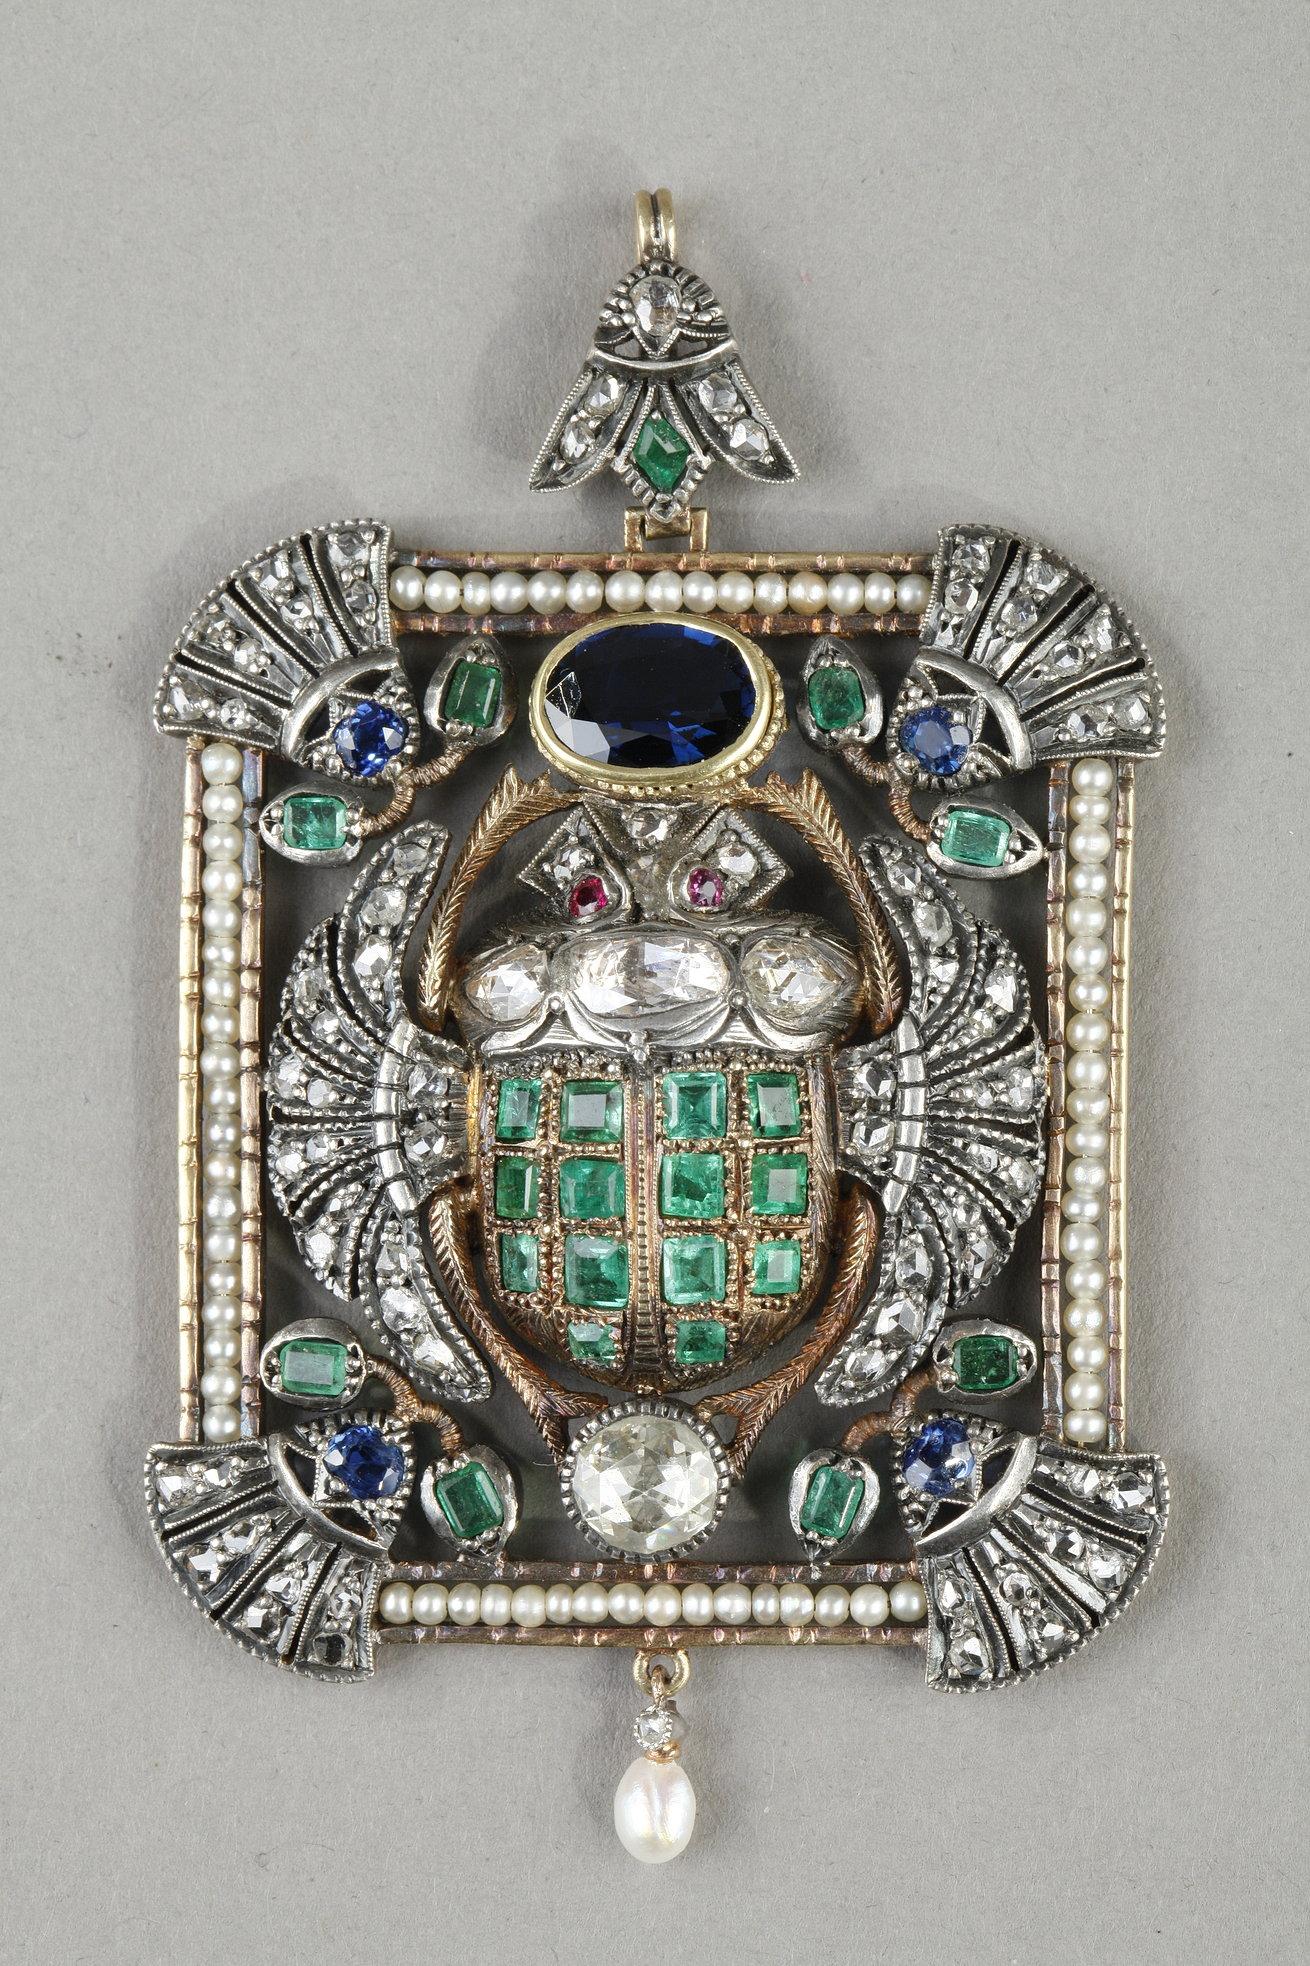 Rectangular gold and silver pendant depicting a winged beetle in a fine pearl frame, the corners of which are decorated with lotus leaf motifs. The beetle is entirely set with sapphire, emerald and diamond stones. It is topped by a cabochon-mounted